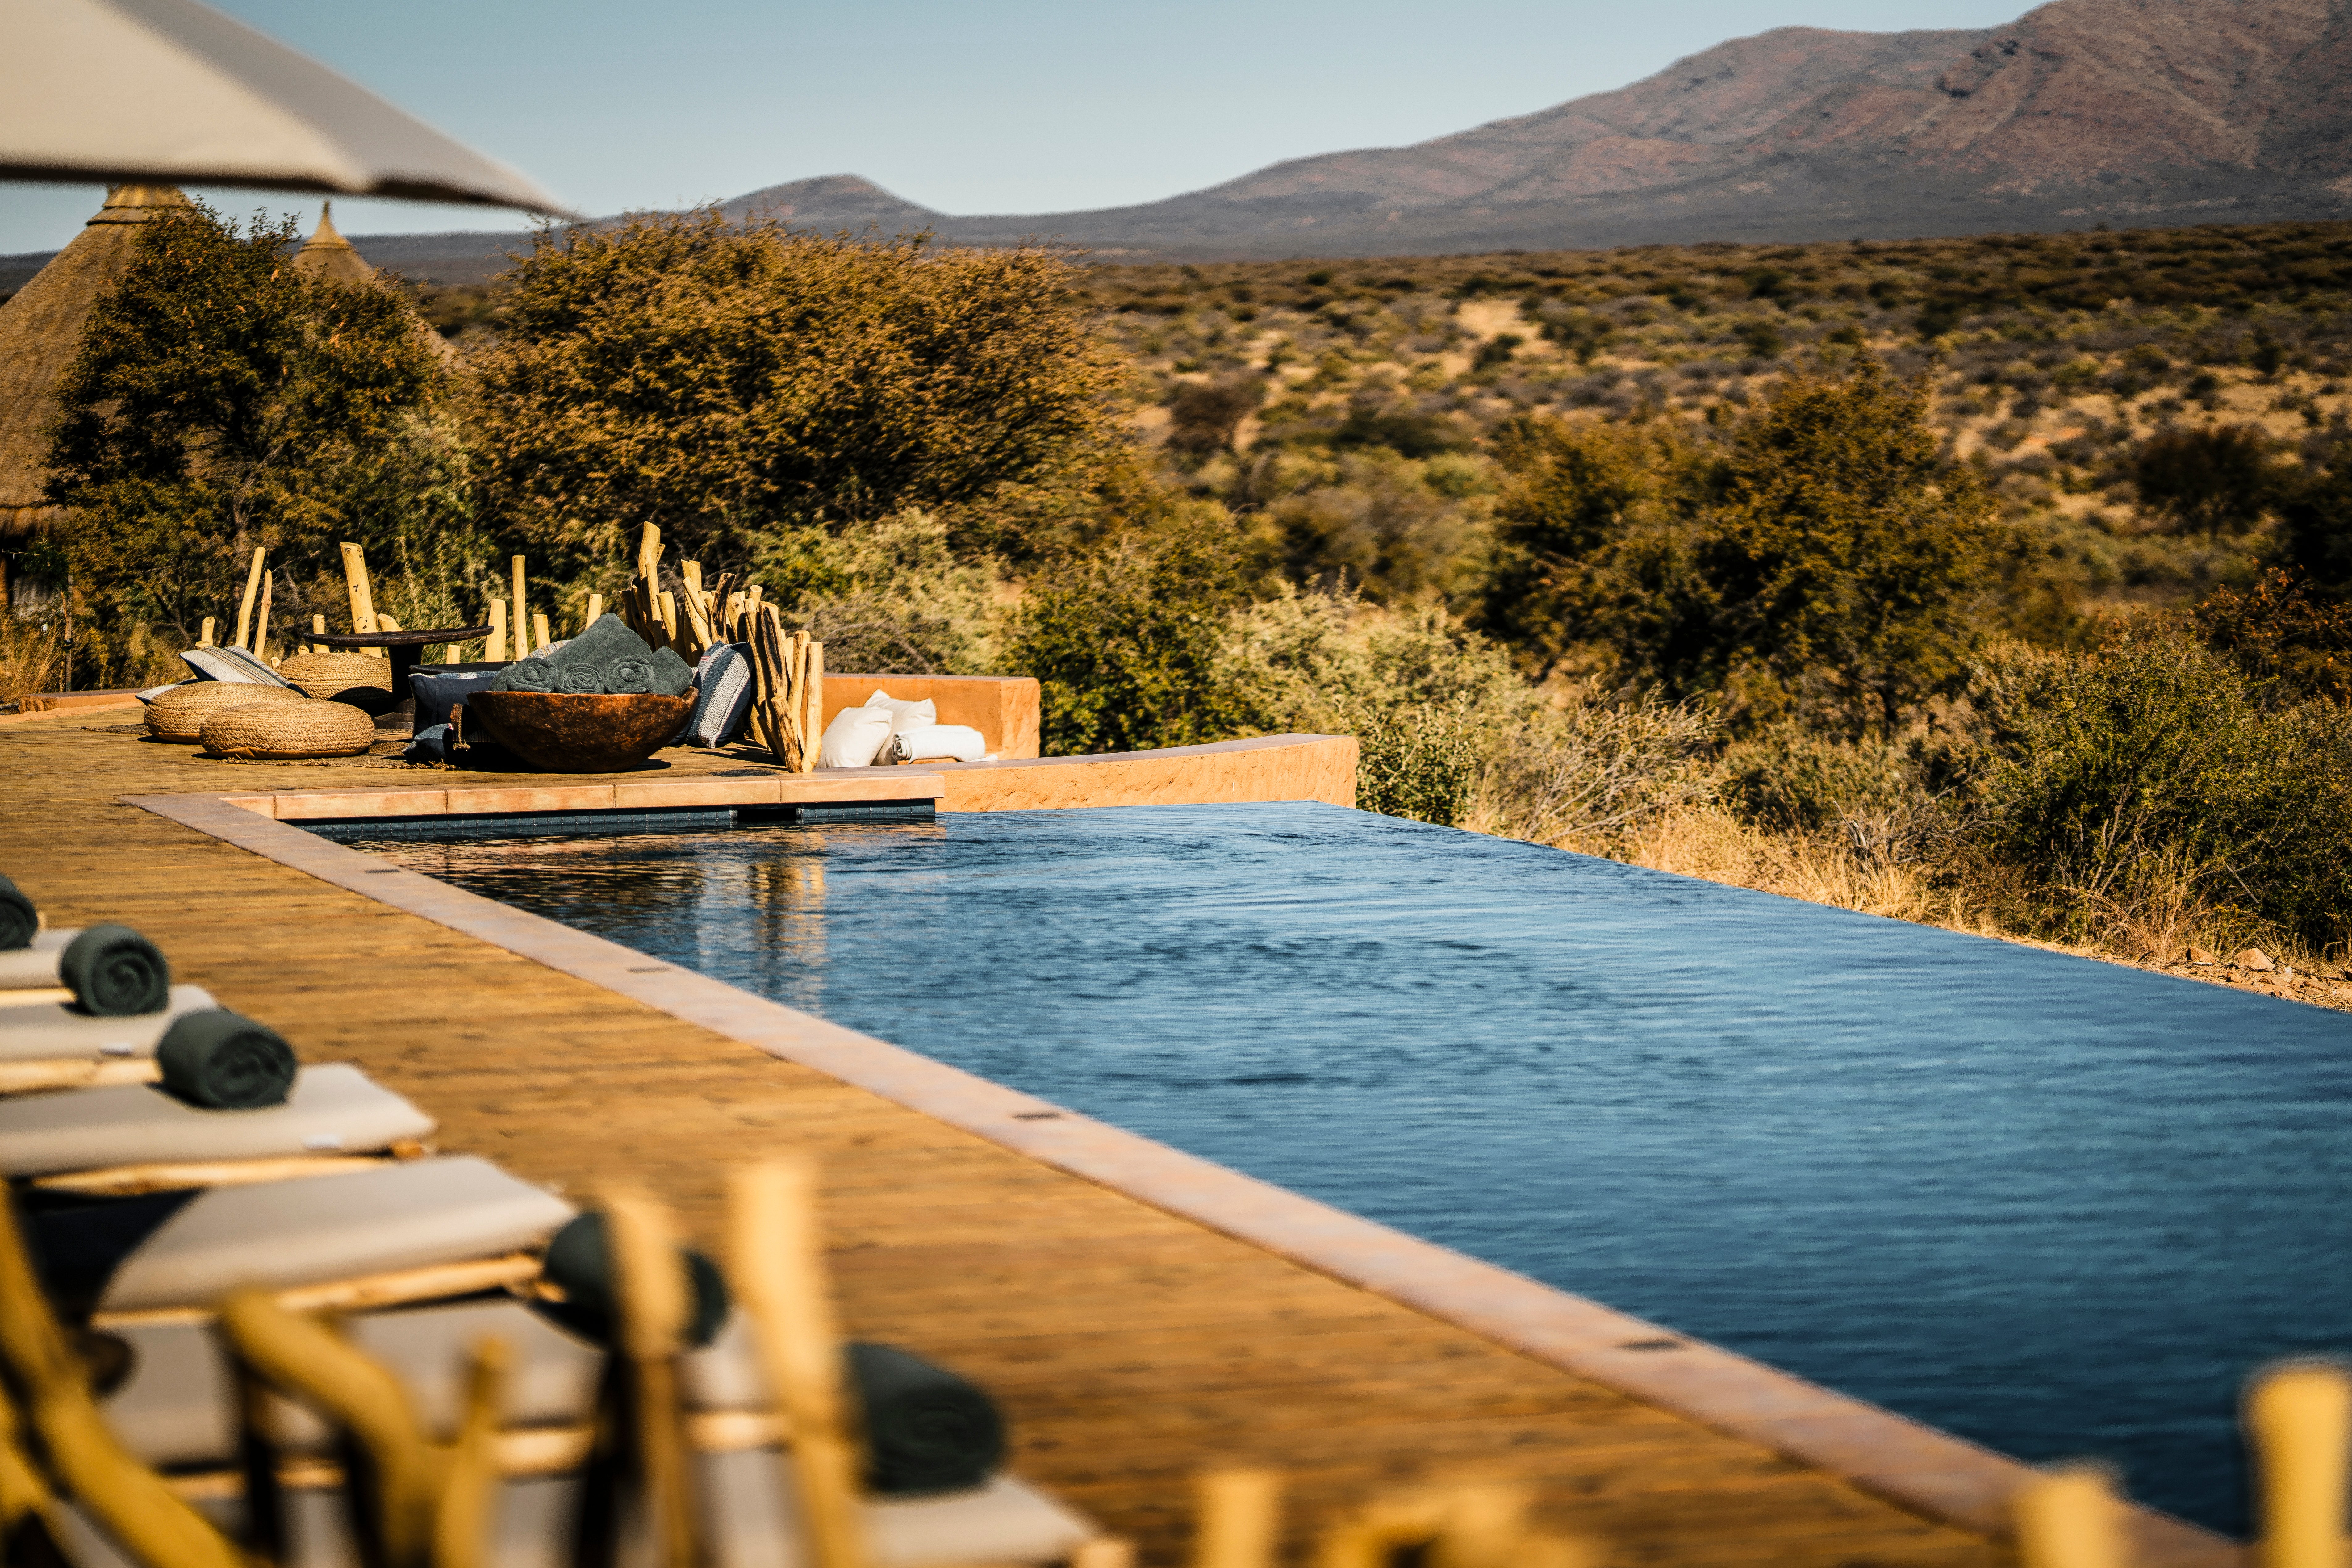 Take in the breathtaking views as you cool off in the savannah